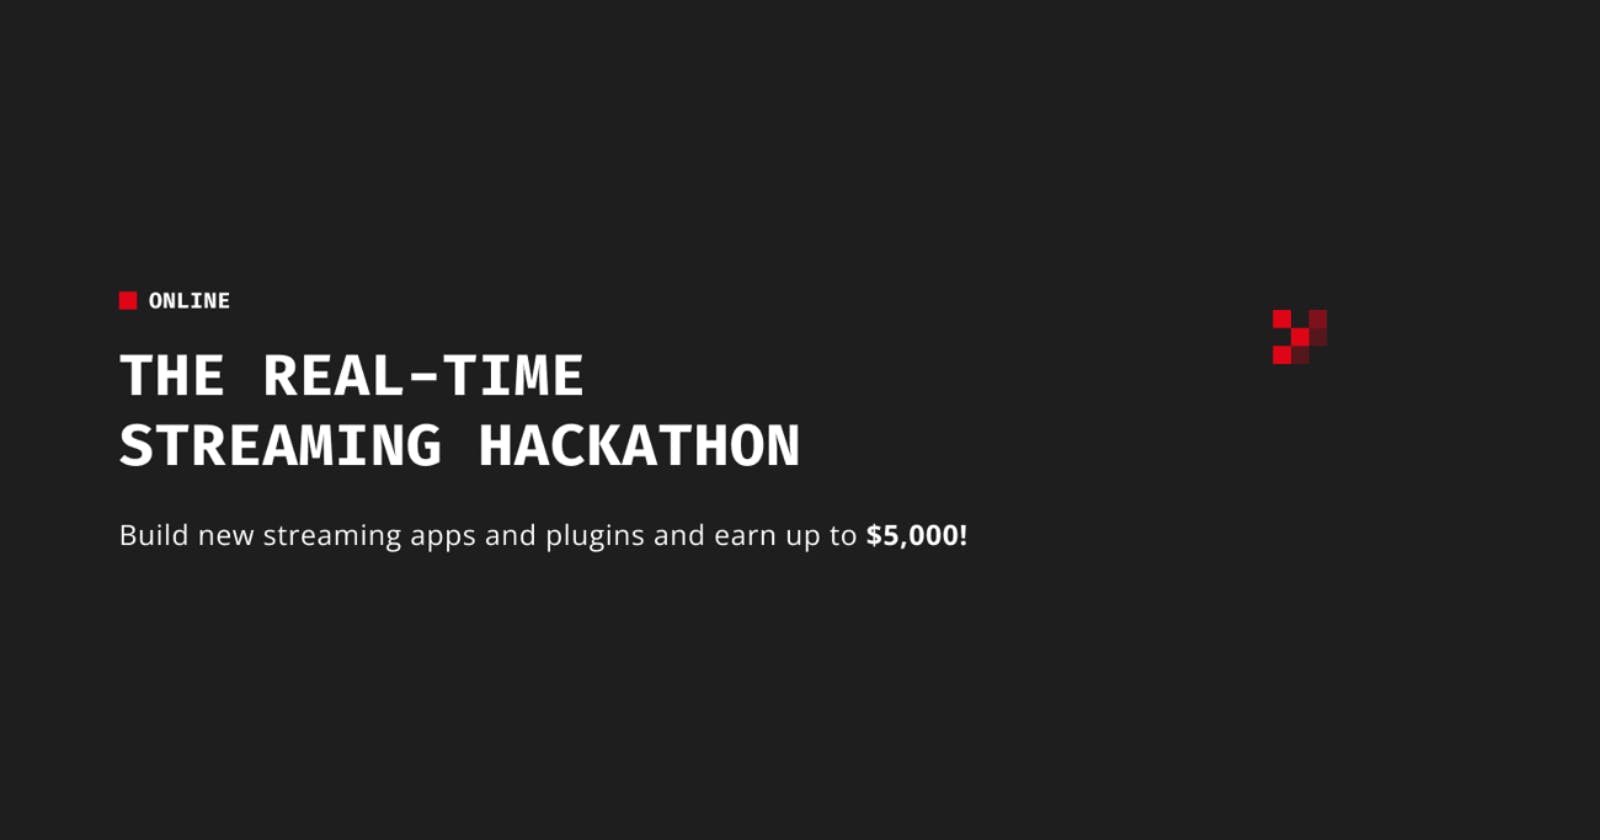 Now registrations are open for REAL-TIME STREAMING HACKATHON